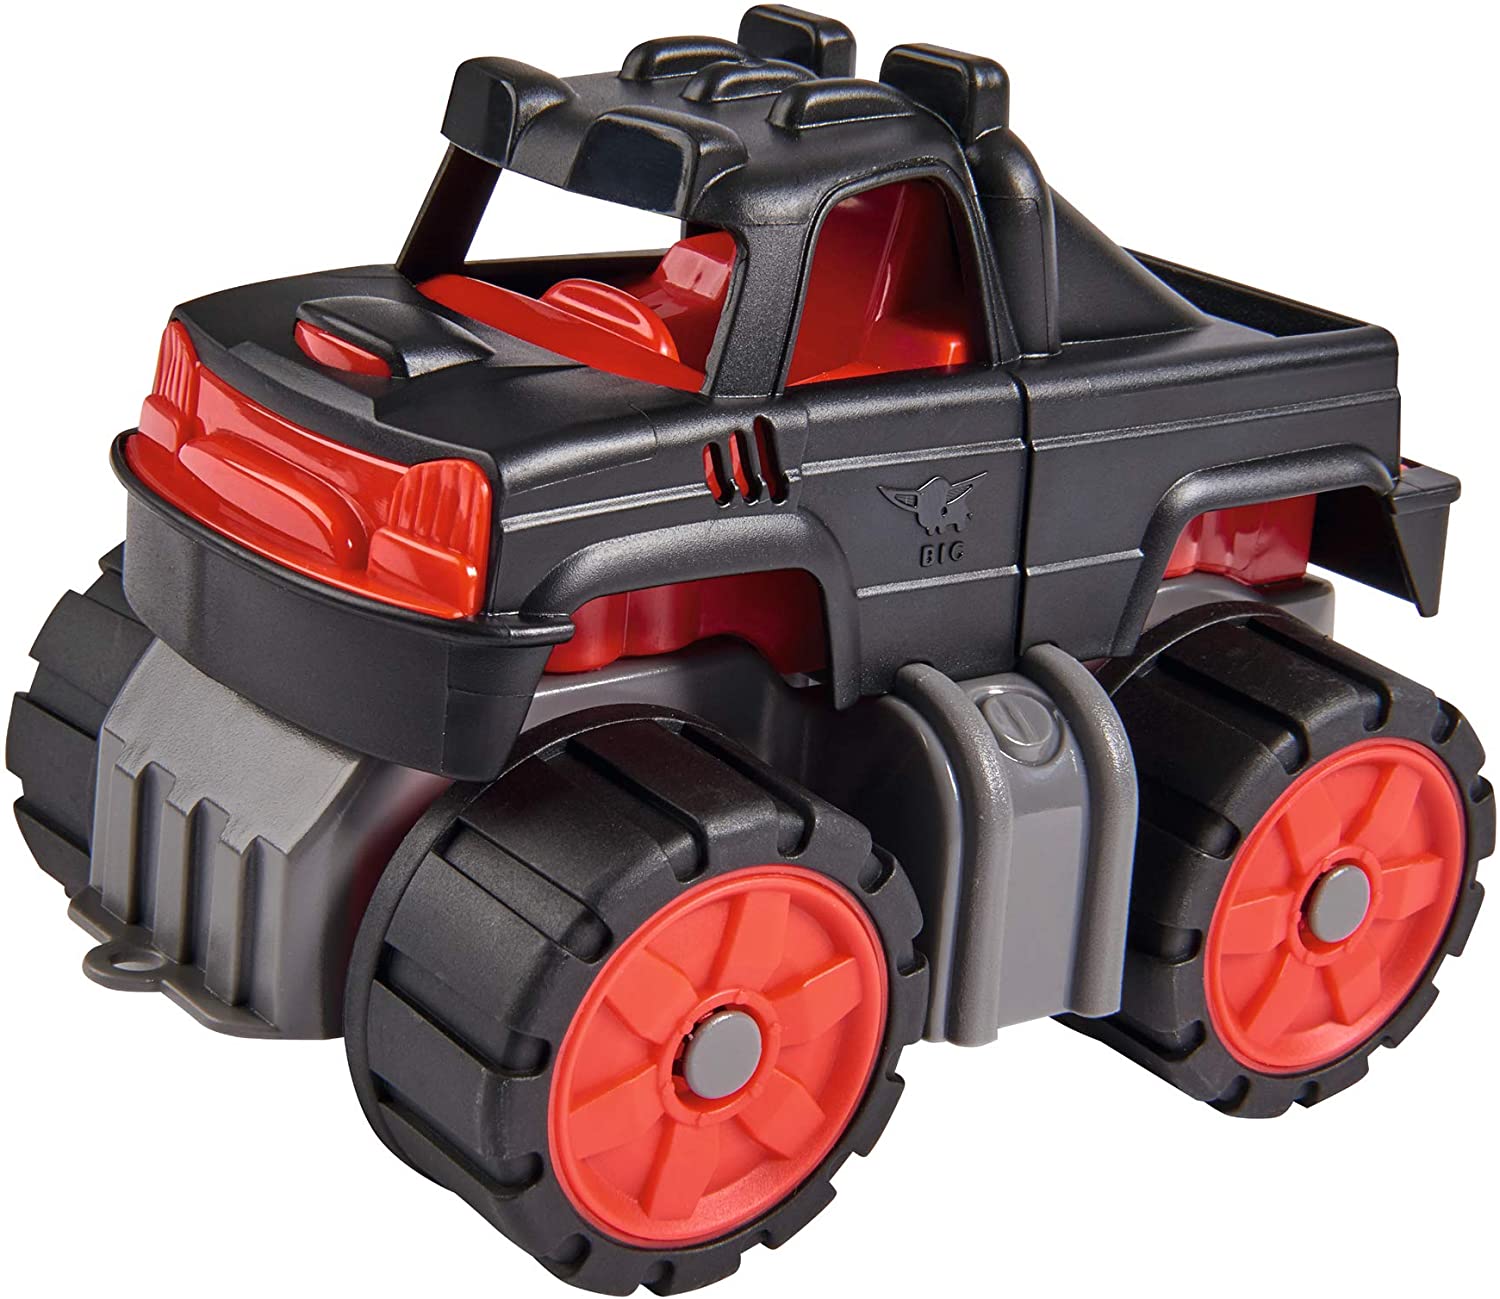 BIG Spielwarenfabrik Big Power Worker Mini Monster Truck, Small Toy Car Ideal For On The Go Tyre